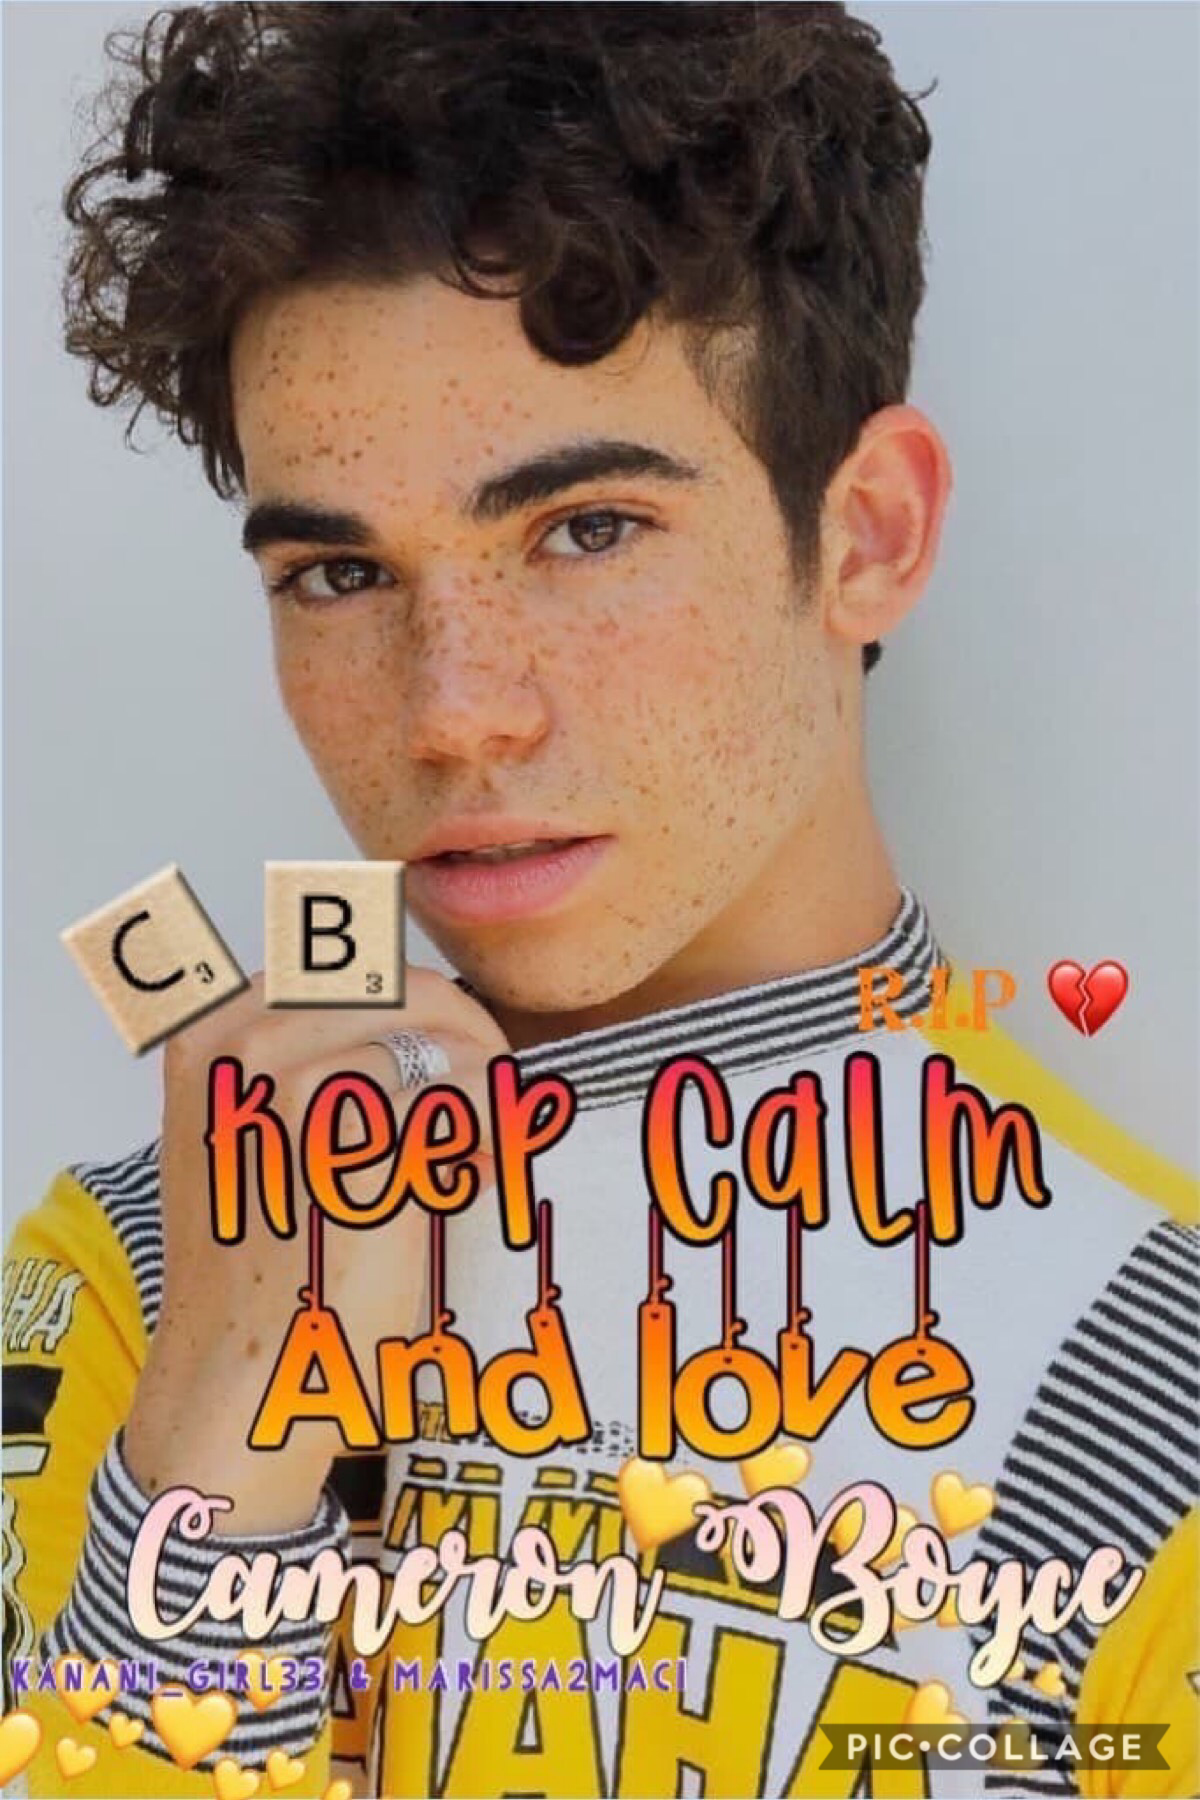 RIP Cameron Boyce ♥️ You Will Be Missed! Qotd: what’s your favorite movie or tv show starring Cameron? Aotd: Descendants (all)